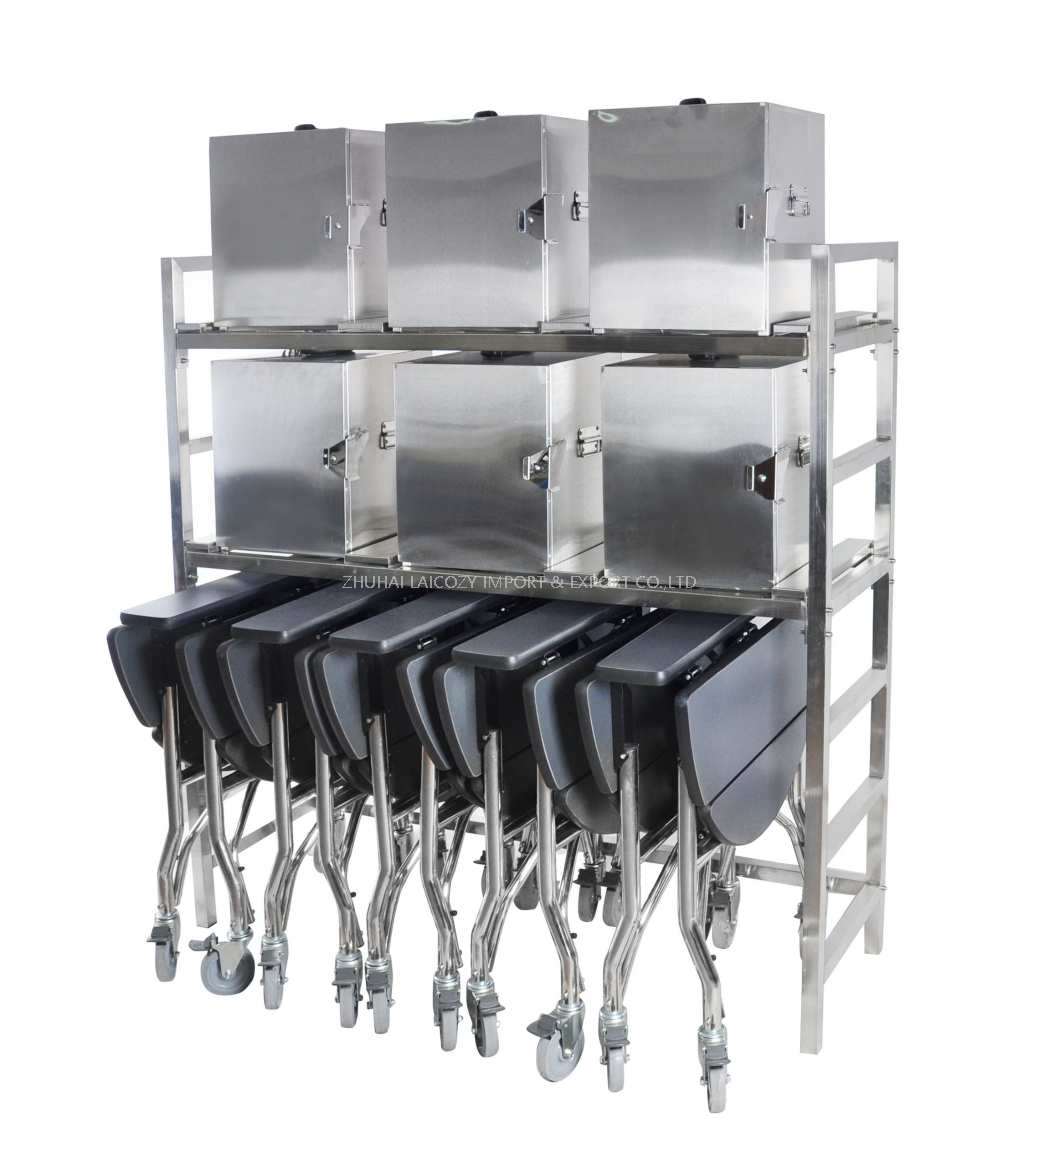 Hotel 304 Stainless Steel Room Service Trolley and Hot Box Storage Shelf Stand